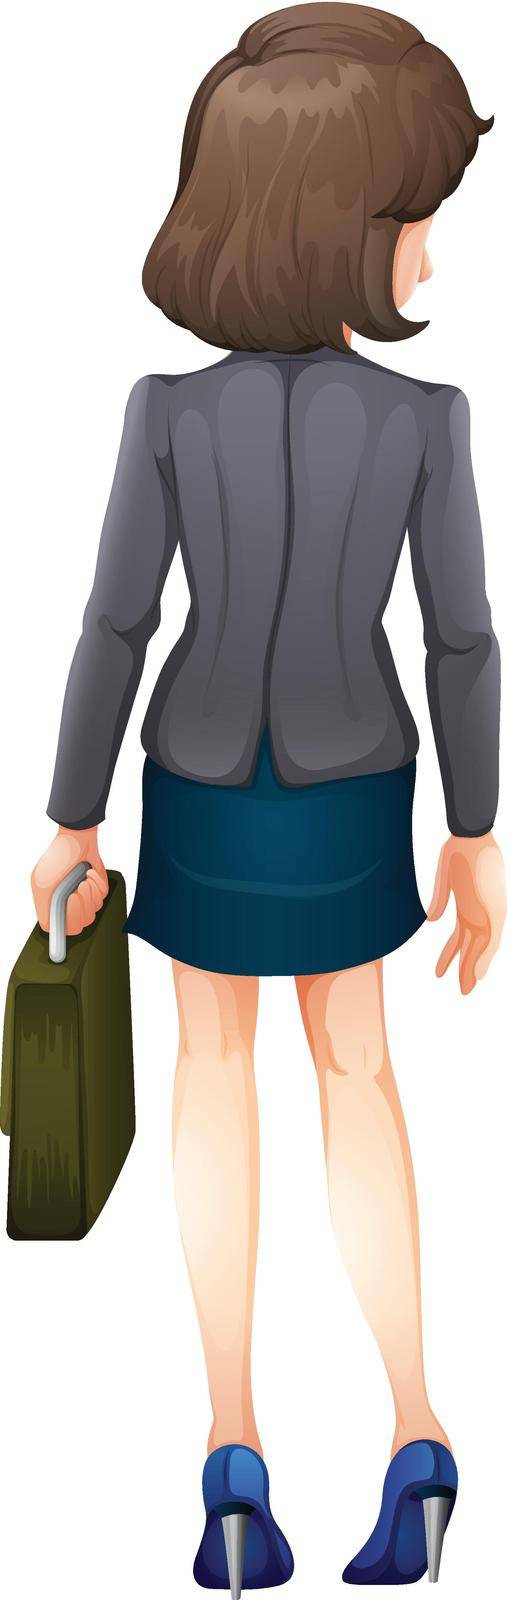 Illustration of a backview of a businesswoman on a white background